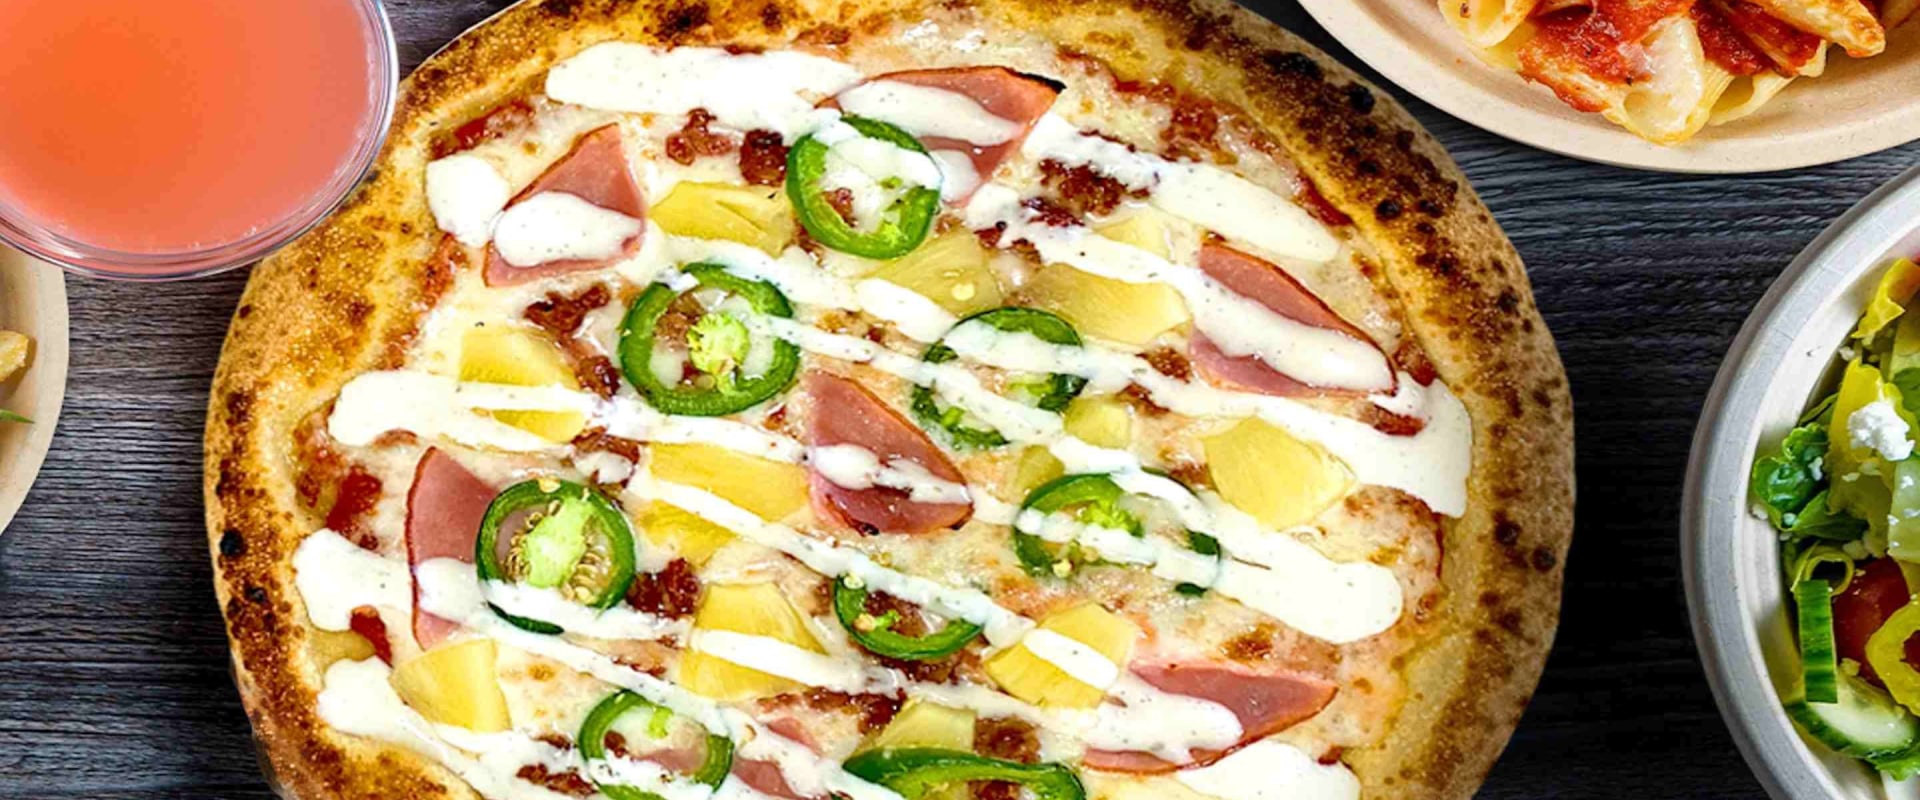 The Best Pizza in Central Virginia: Where to Order and What to Try